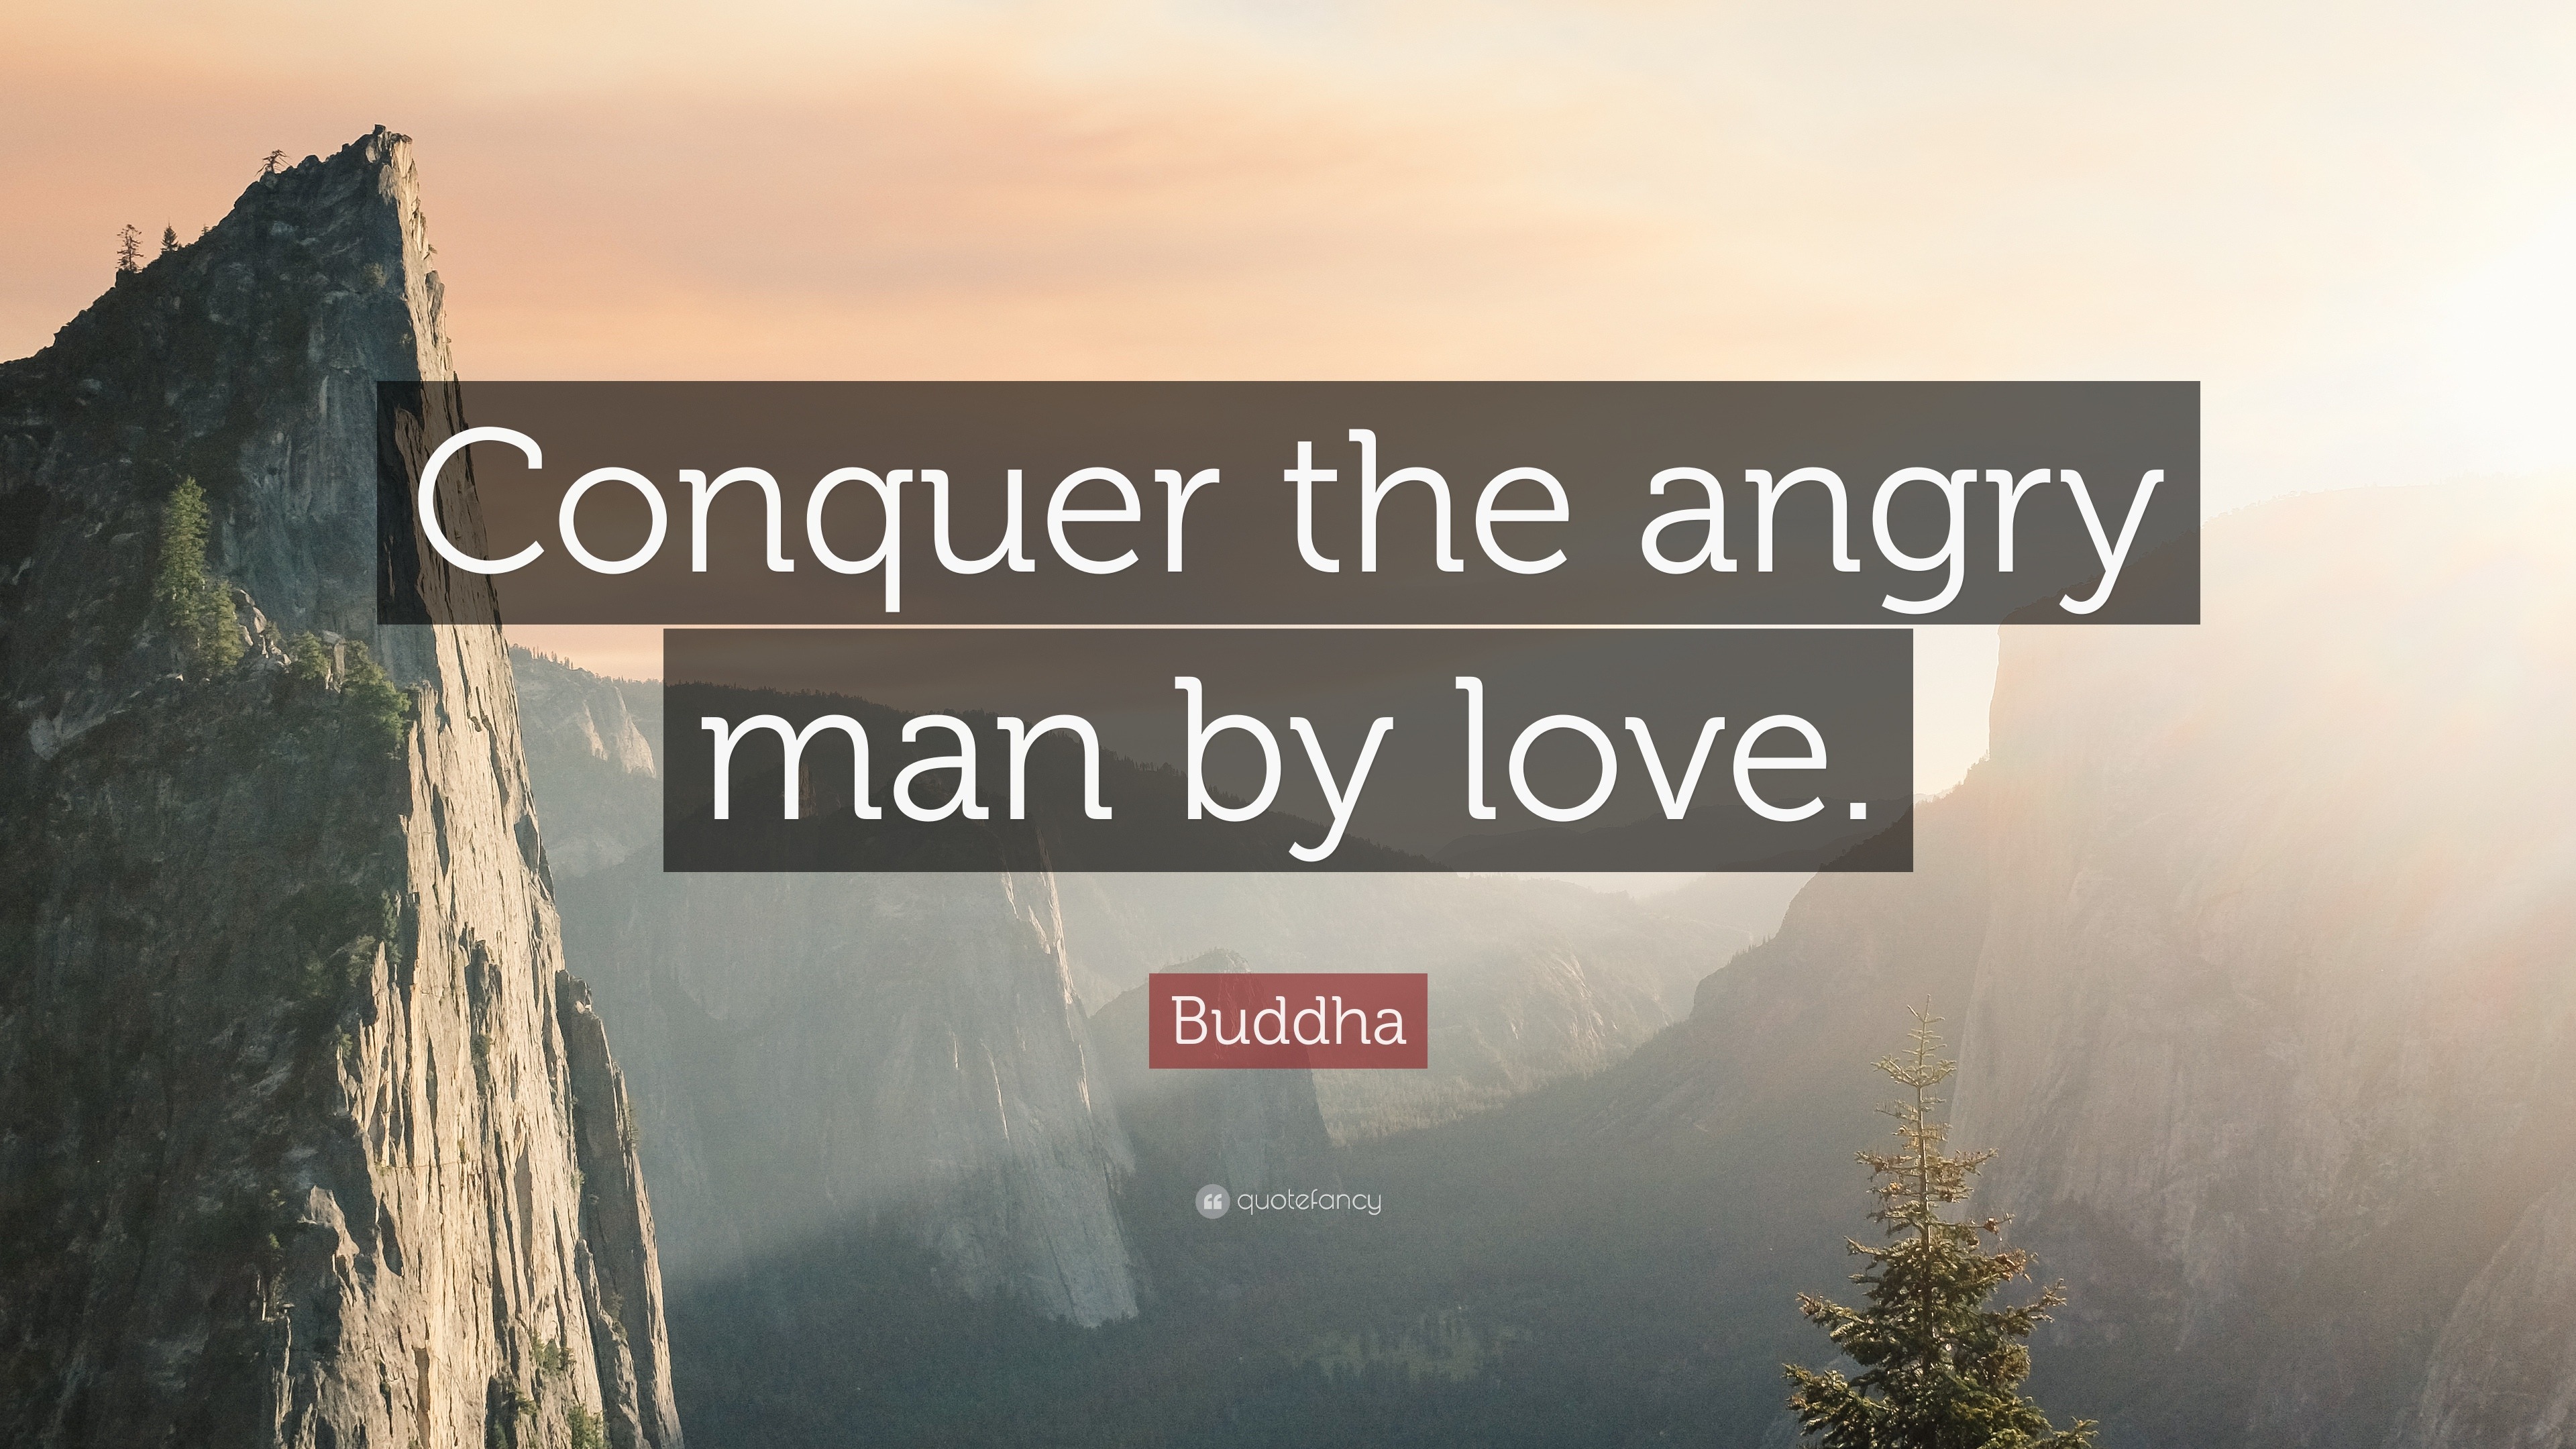 Buddha Quote “Conquer the angry man by love ”